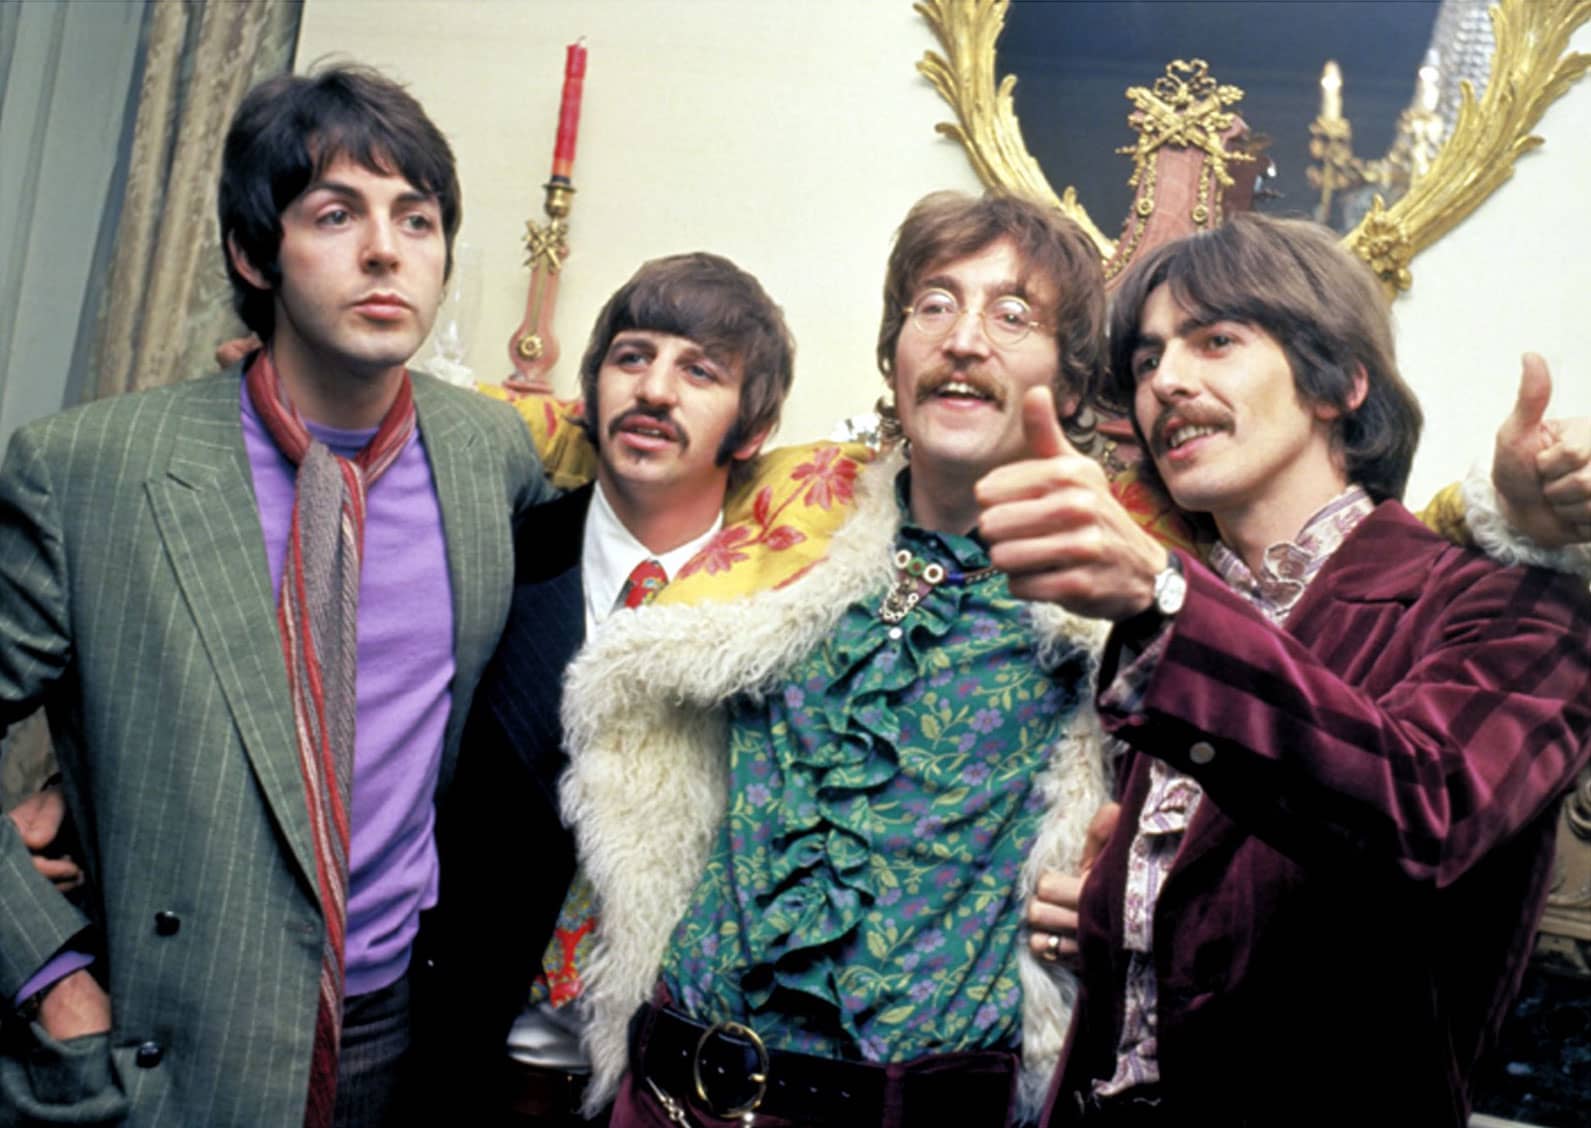 sgtpepperparty